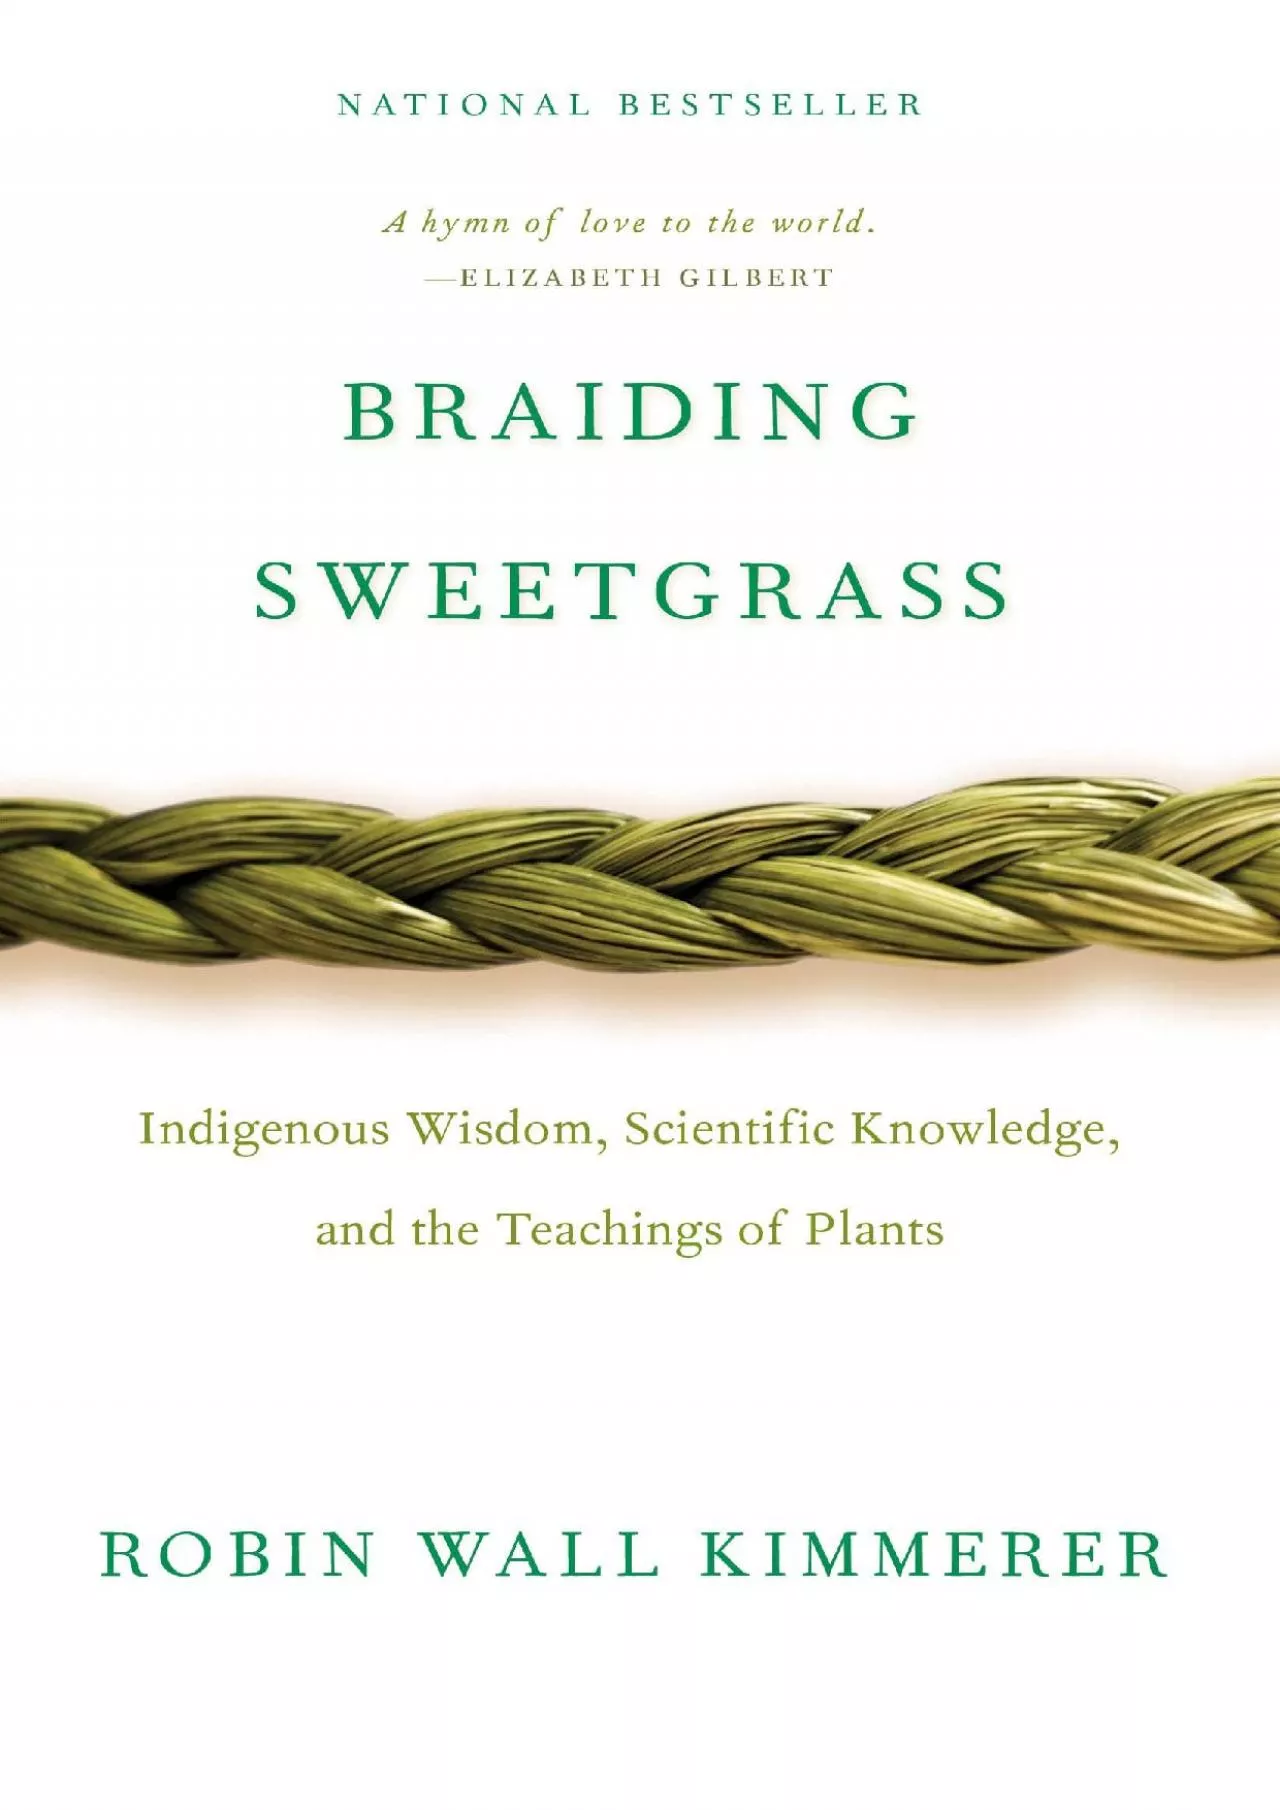 (EBOOK)-Braiding Sweetgrass: Indigenous Wisdom, Scientific Knowledge and the Teachings